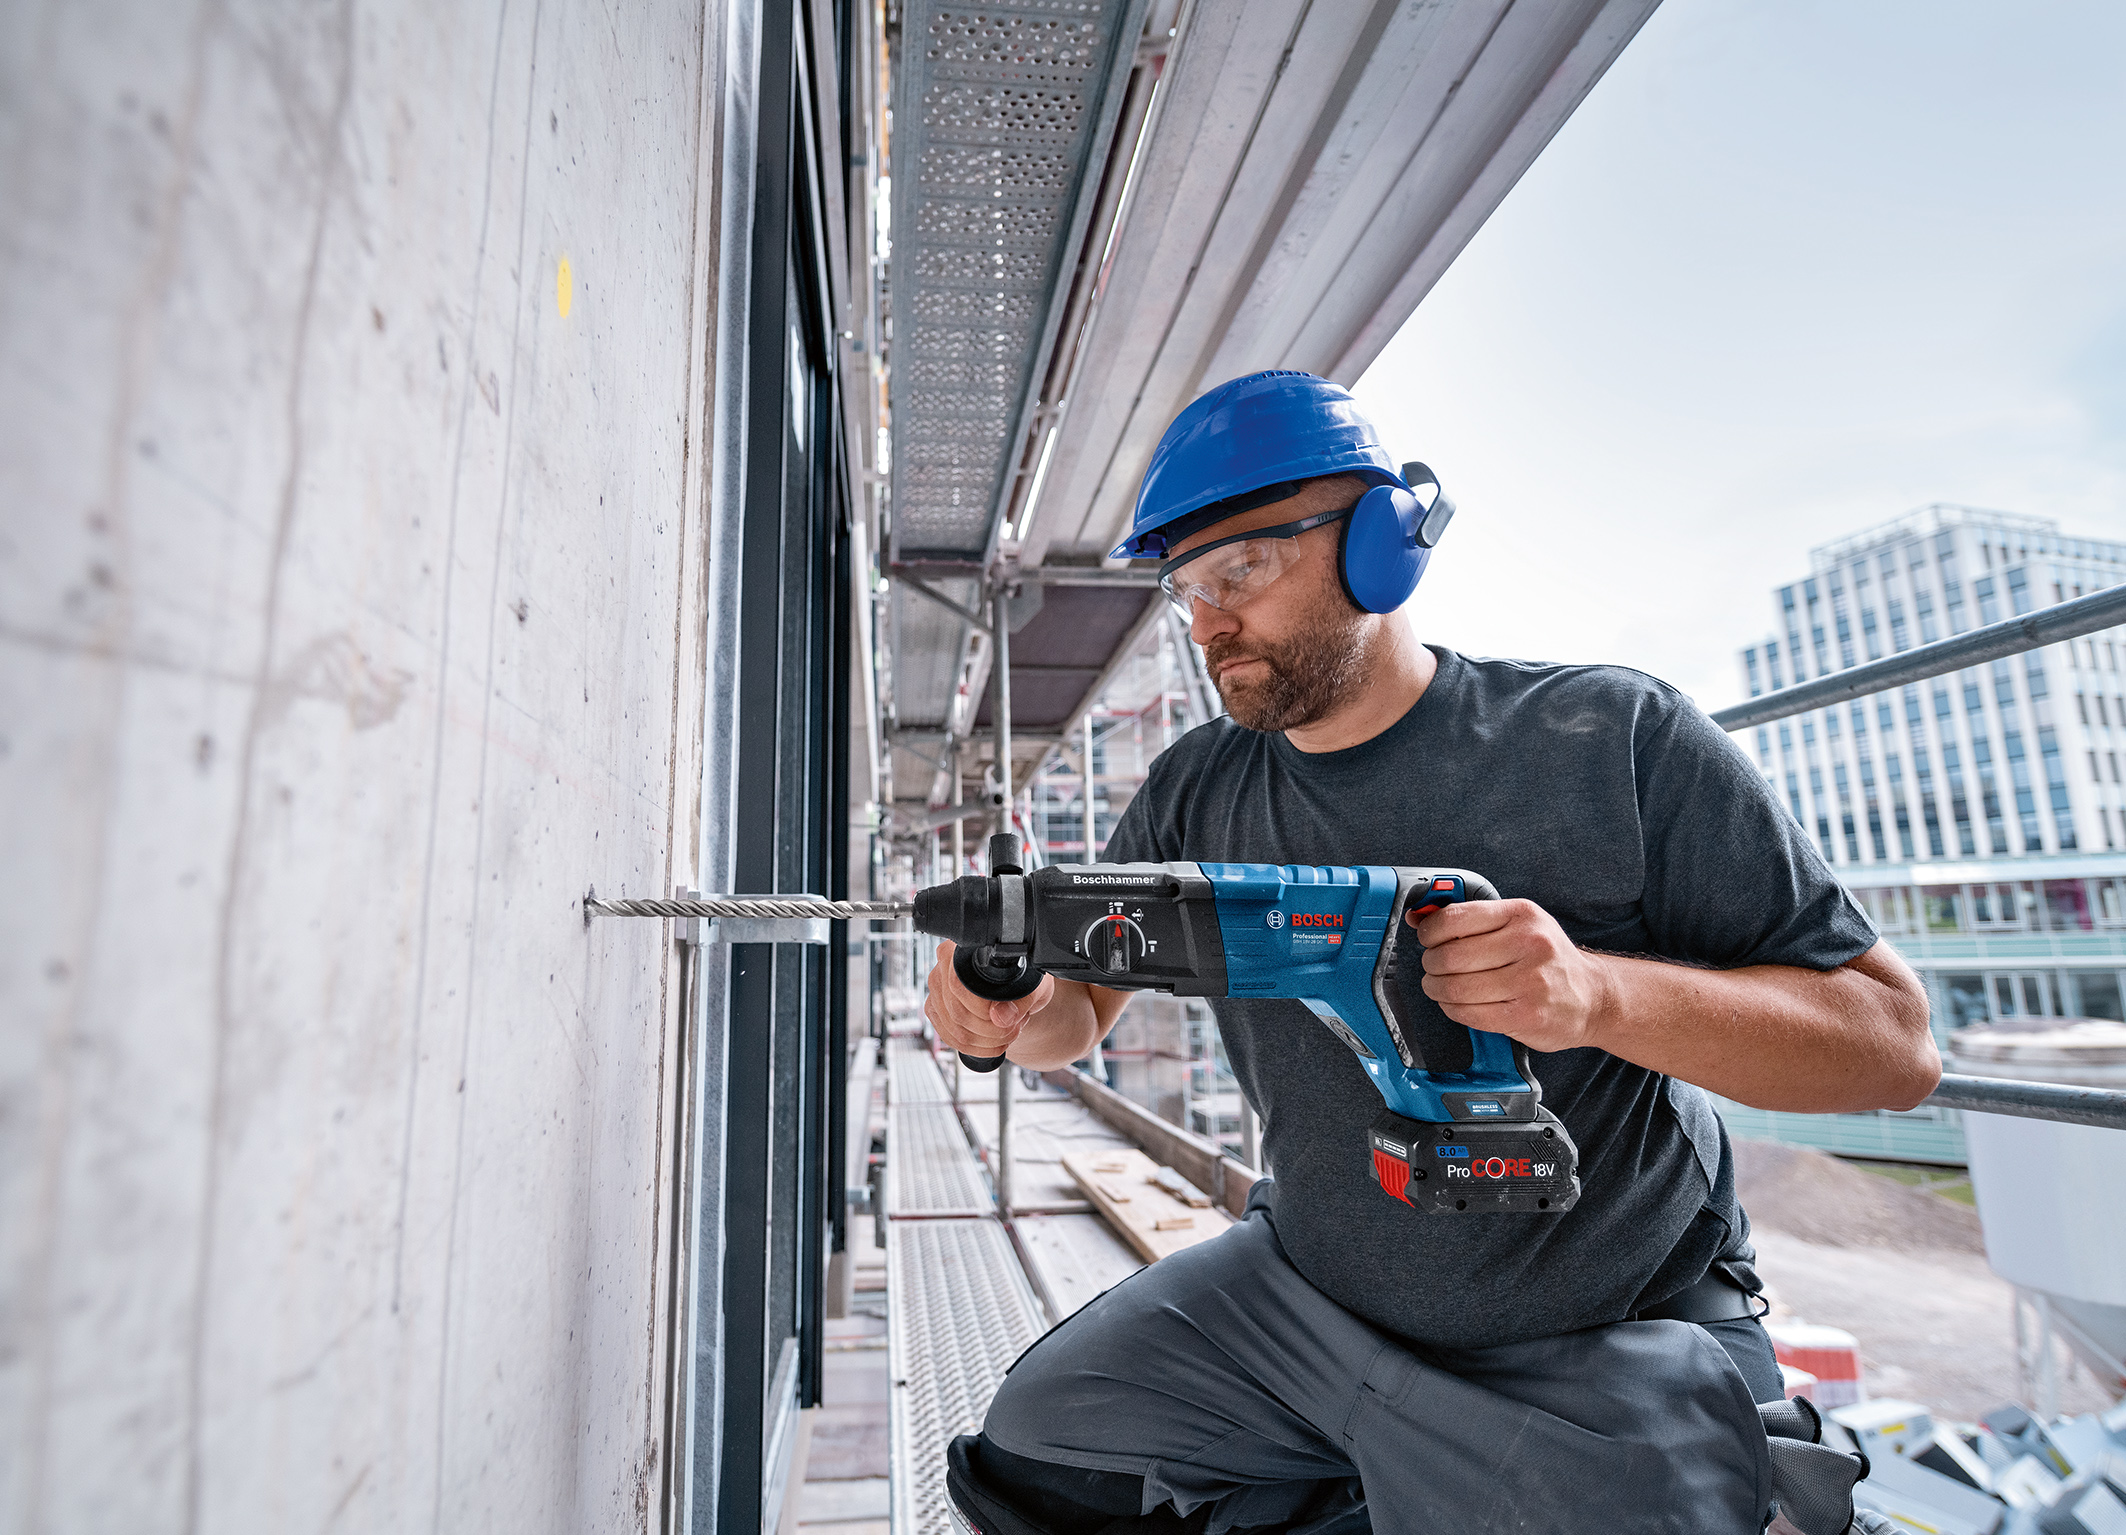 Multiple user-protection features, including a fall protection system: Bosch GBH 18V-28 DC Professional 18V rotary hammer for professionals